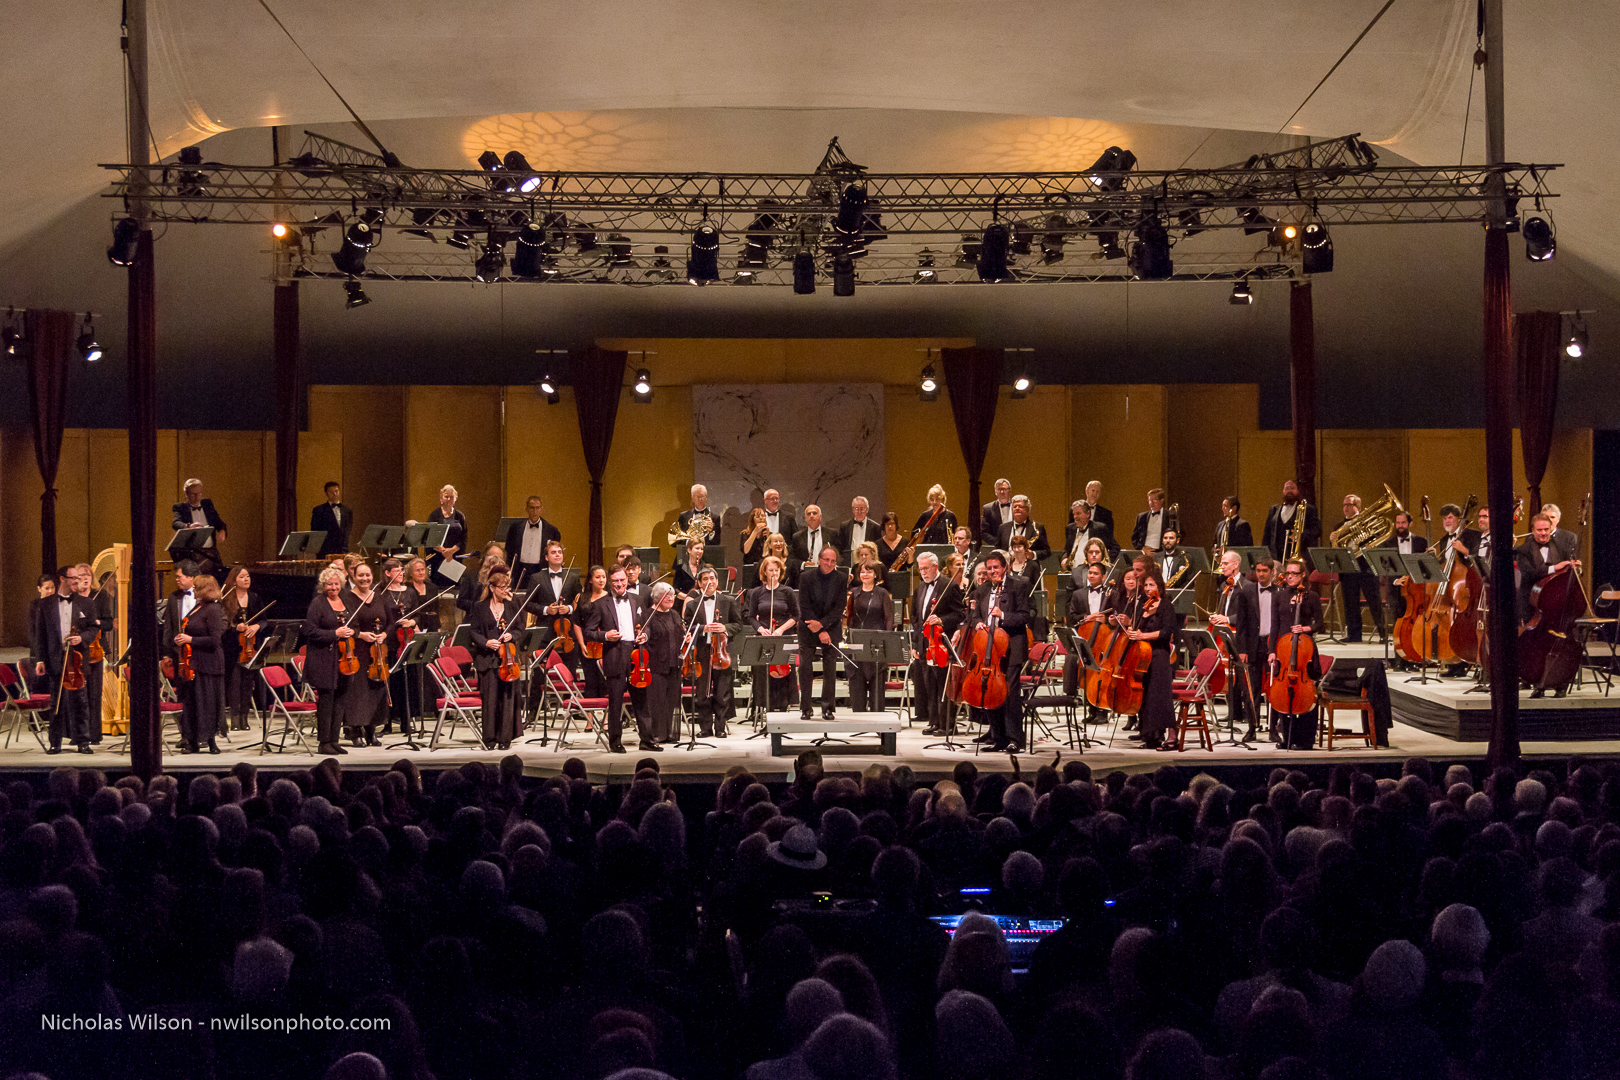 The festival orchestra stands to acknowledge applause at the start of the opening concert